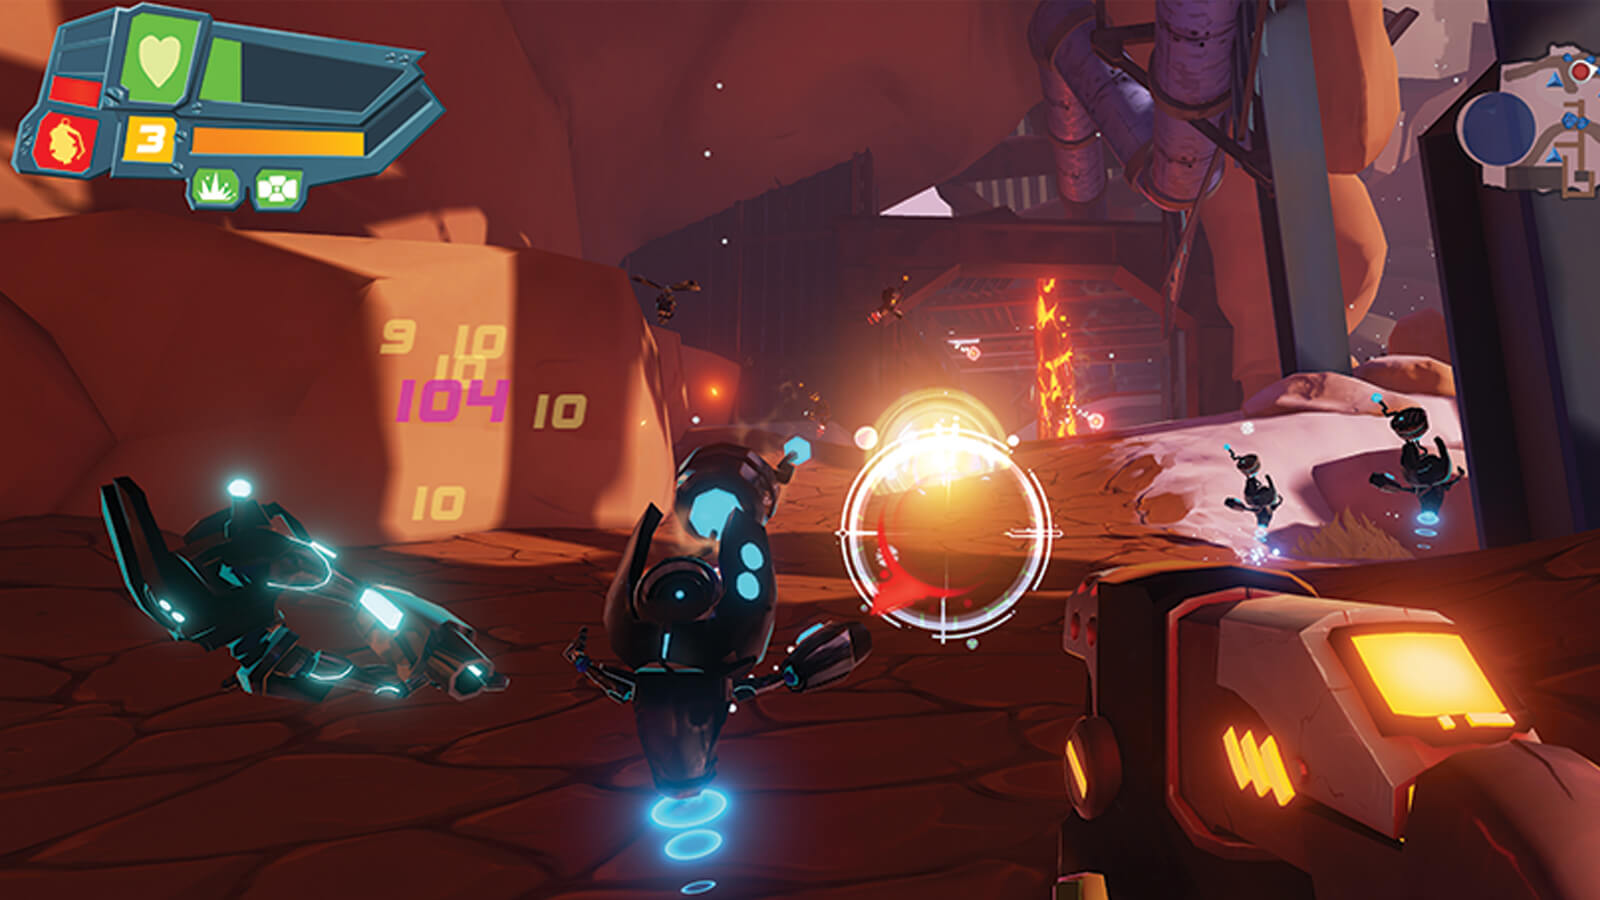 A boxy gun's reticle hovers near a yellow explosion in the distance, surrounded by levitating robots.